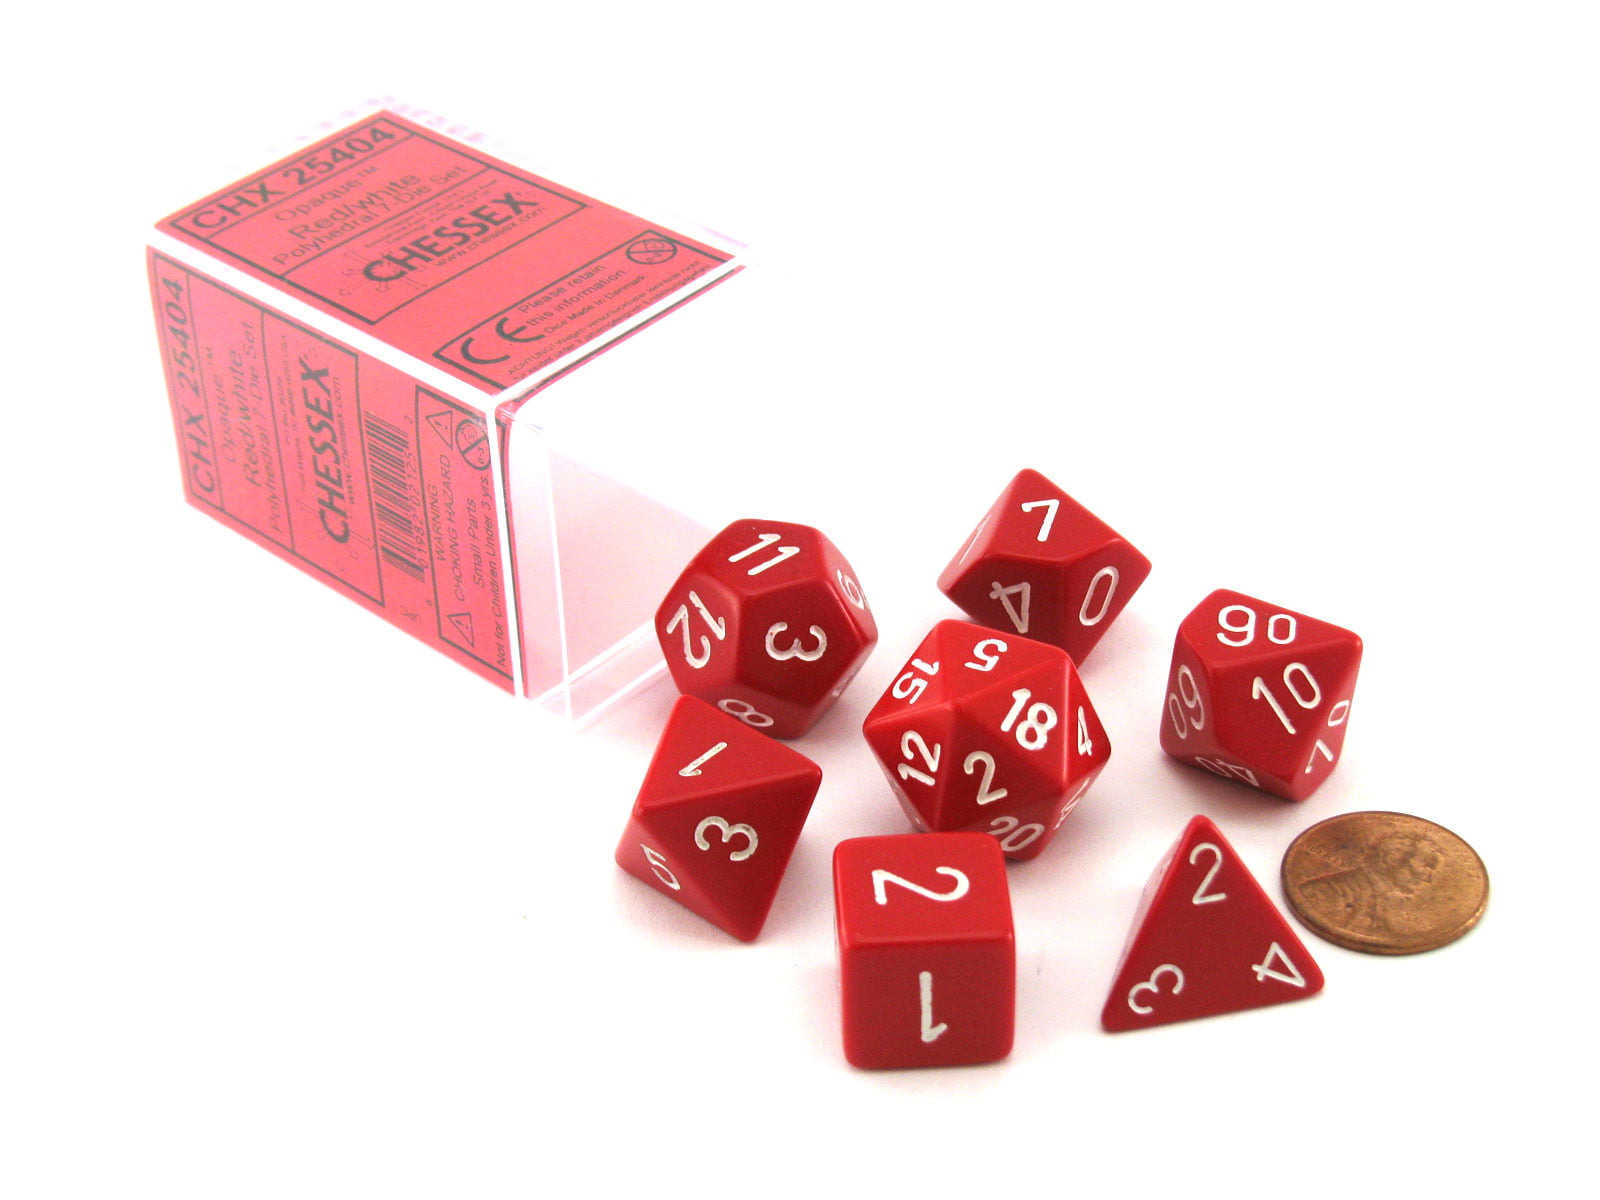 Chessex Polyhedral 7-Die Opaque Dice Set - Red with White Numbers